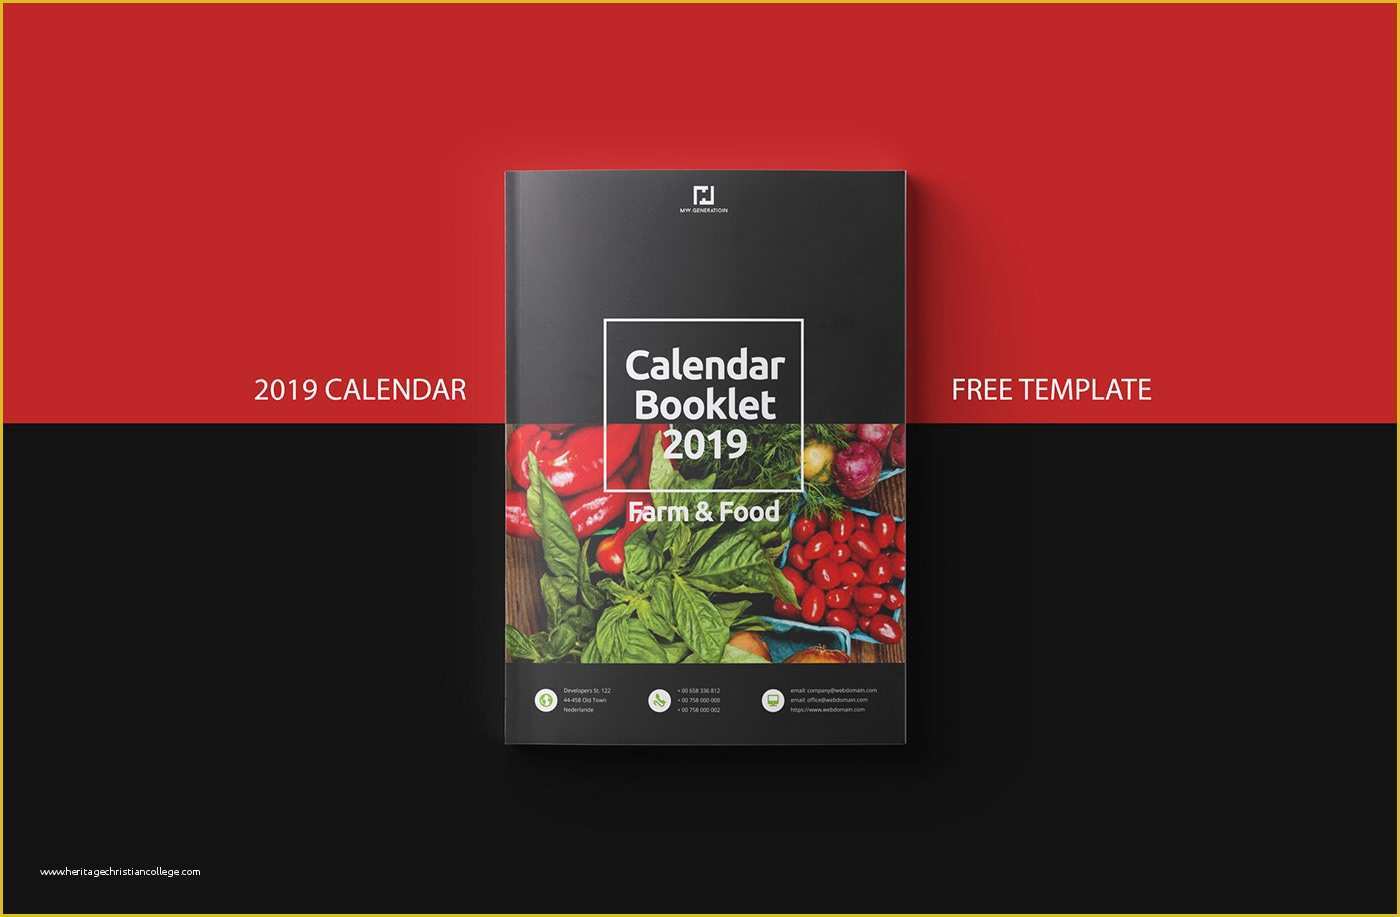 Free Indesign Templates Of Free Calendar 2019 Indesign Template On Behance